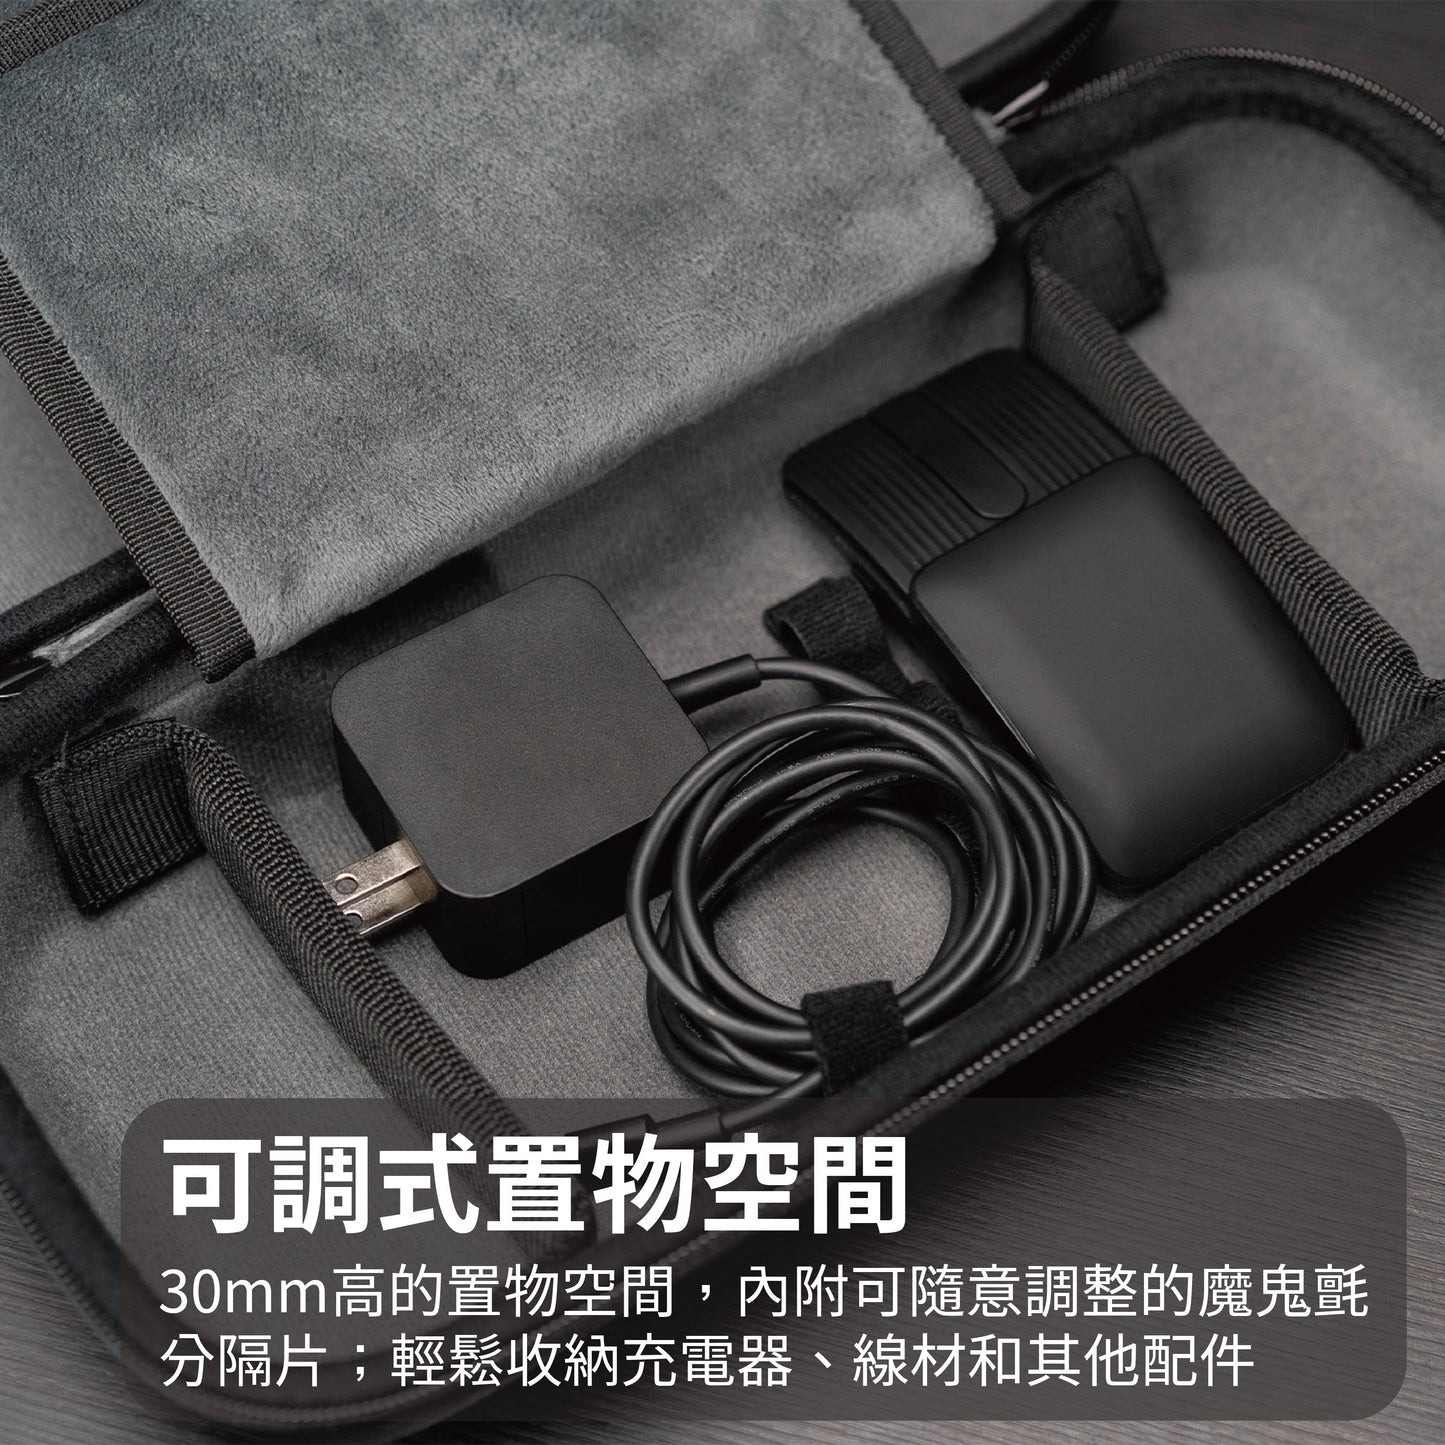 Universal hard shell storage bag for ROG Ally/Steam Deck and other handheld devices 